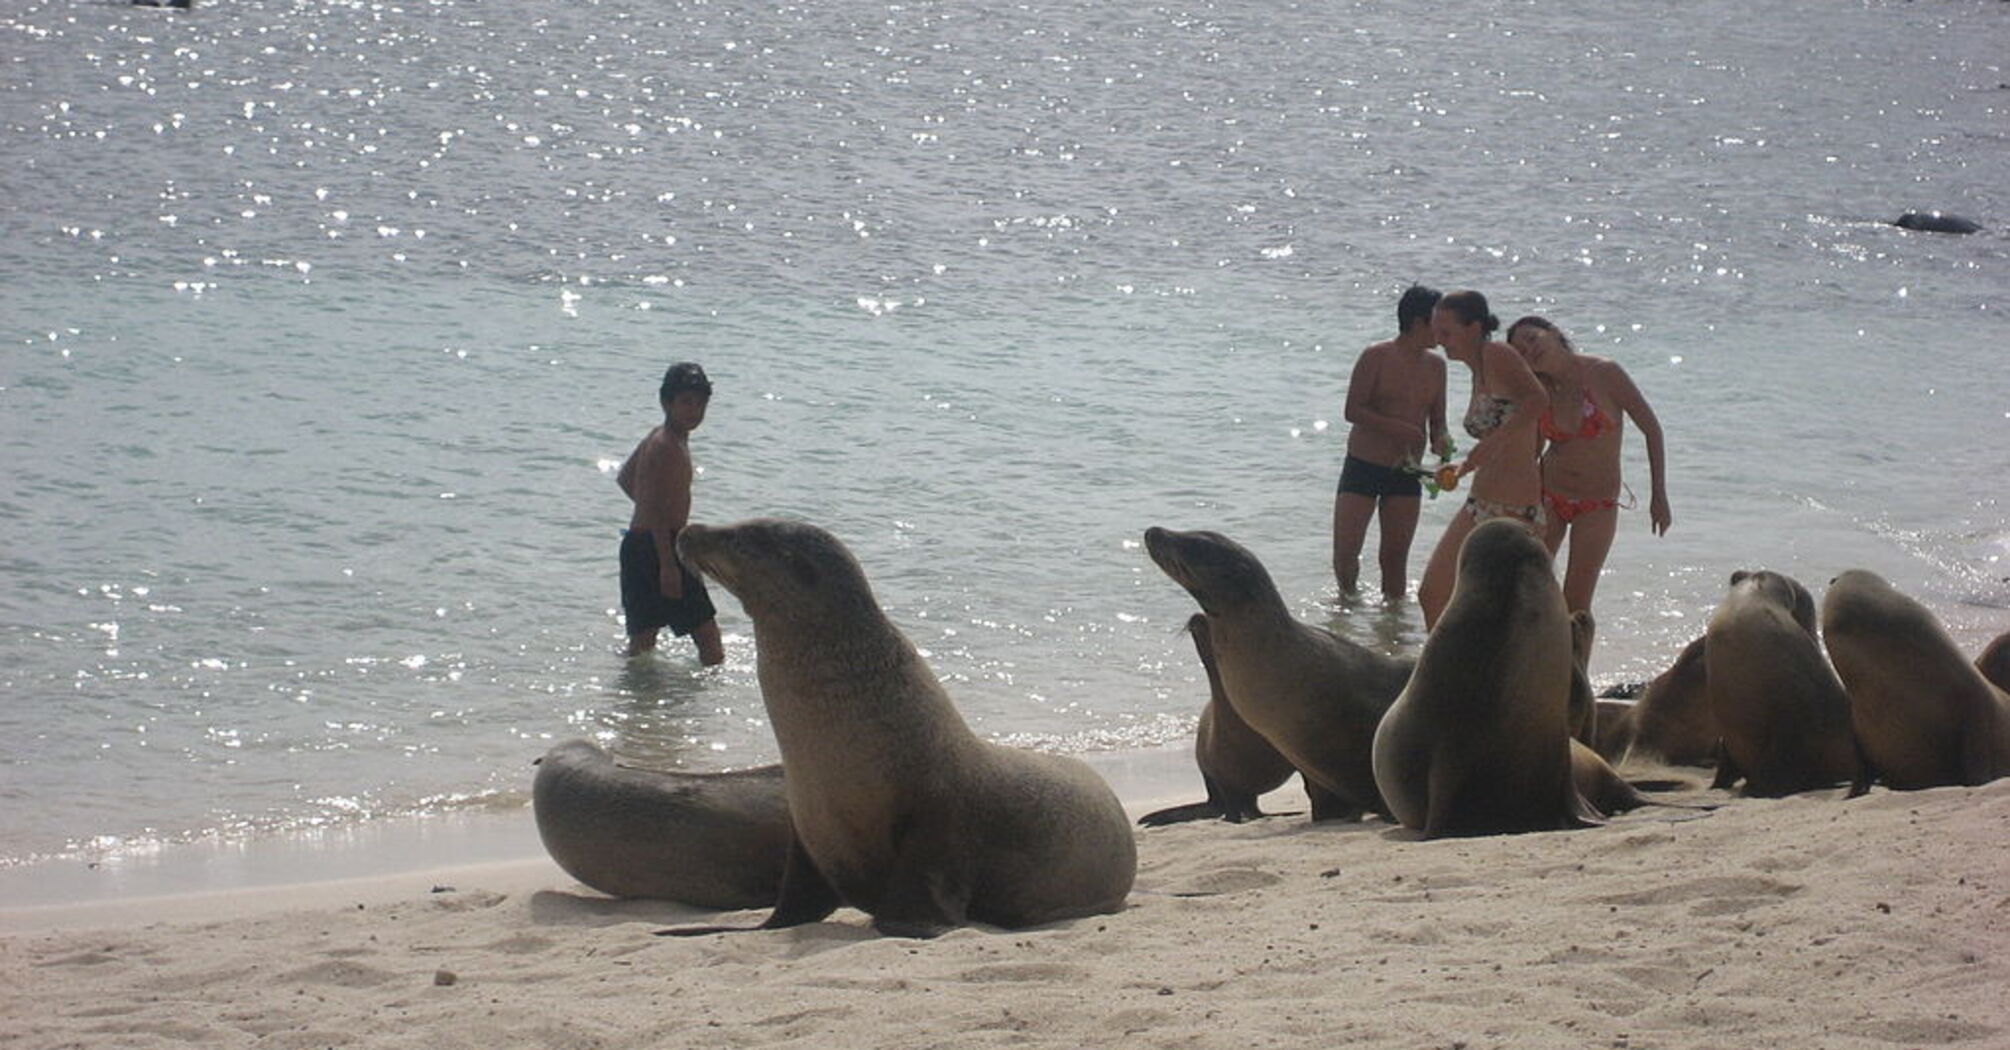 Wonders of the Galapagos Islands: giant tortoises, surfing, and rare animals